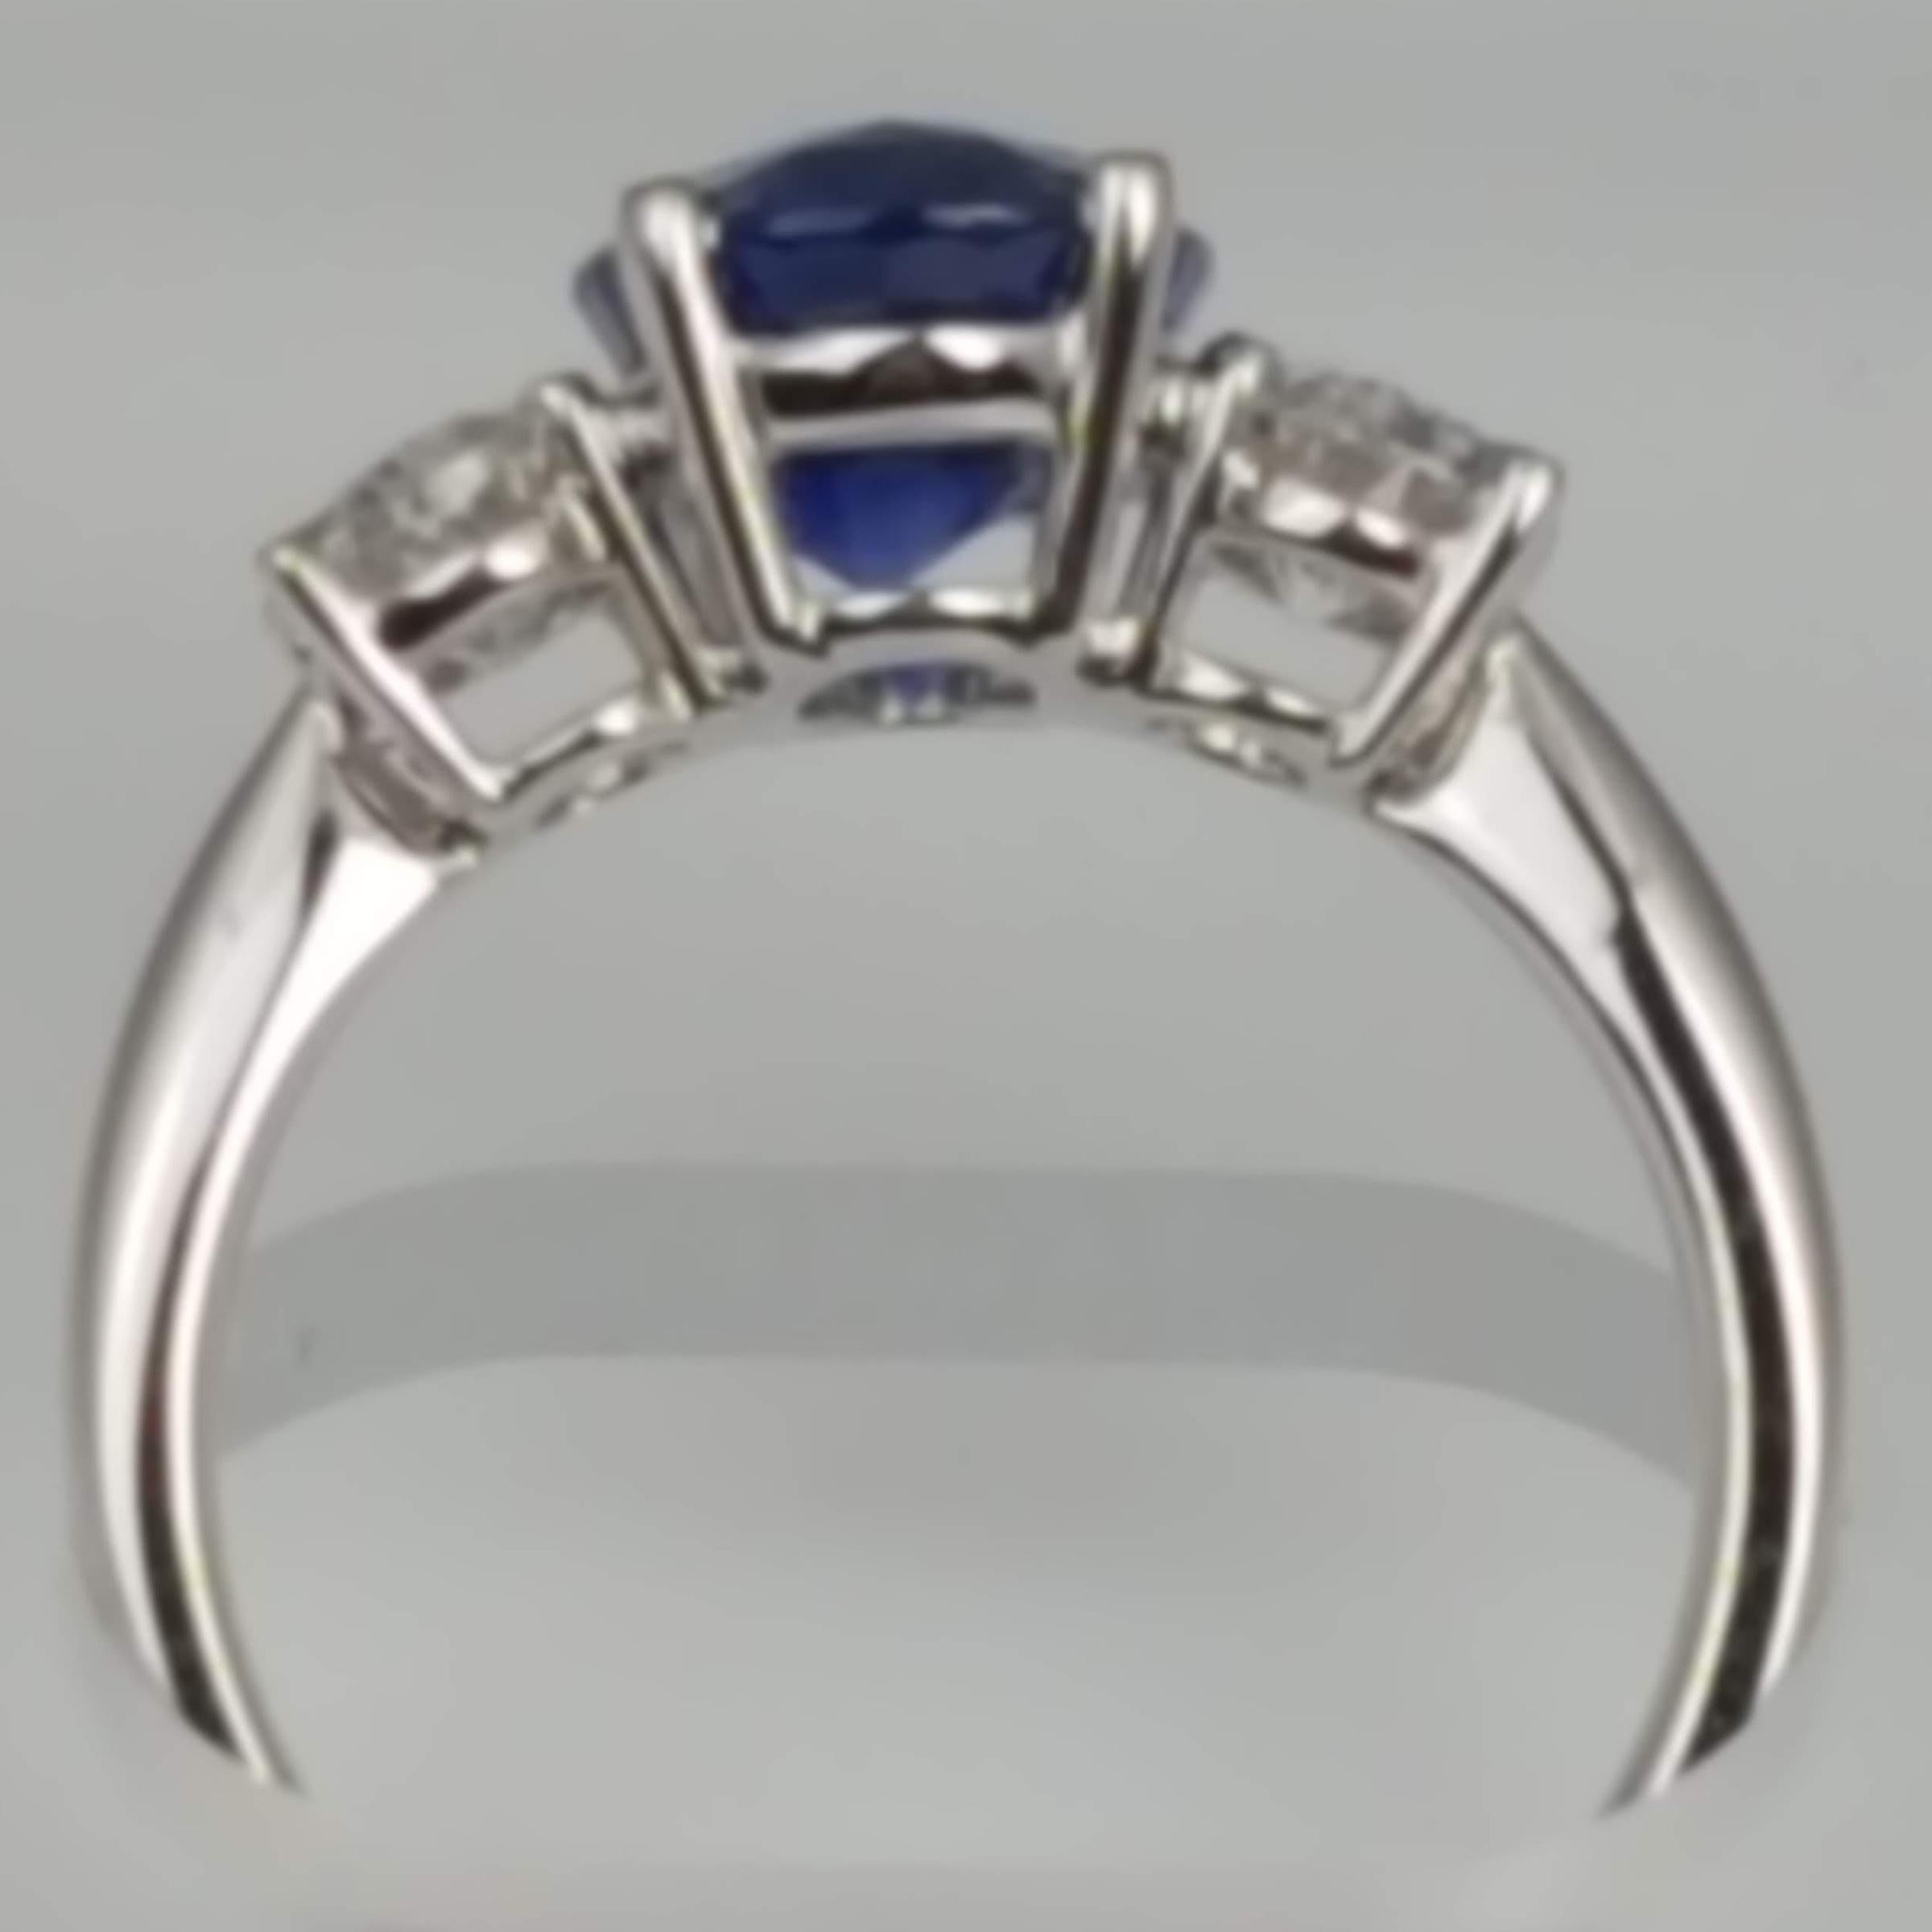 Featuring a GIA Certified 3.16 carat oval-cut blue Ceylon sapphire at its center, flanked by two oval-cut diamonds with a total diamond weight of 0.87 carats, this ring exudes radiance from every perspective.

GIA Certification details (see